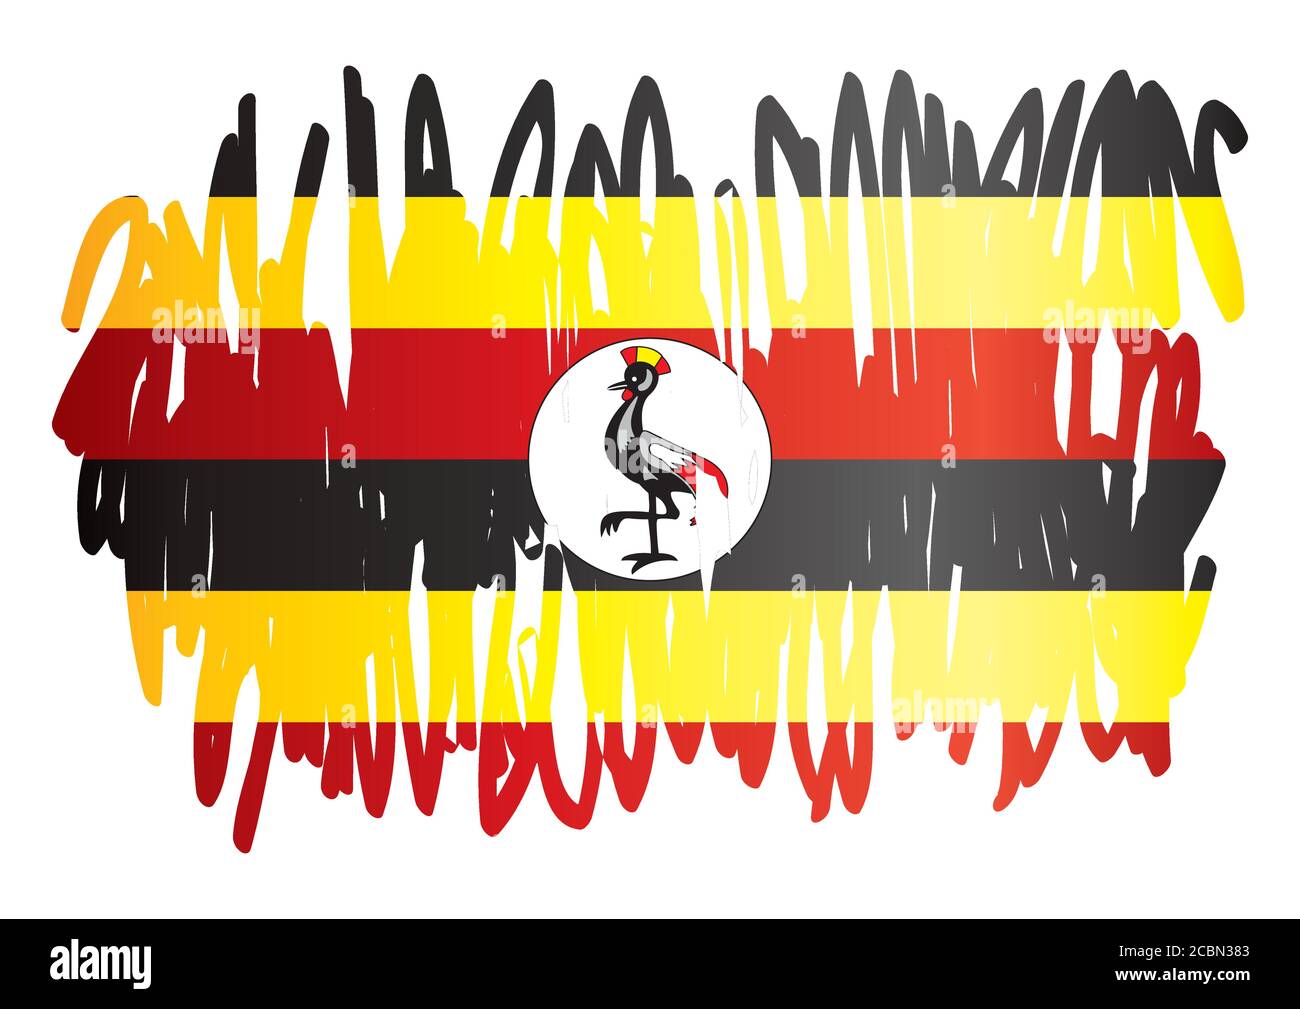 Flag of Uganda, Republic of Uganda. Template for award design, an official document with the flag of Uganda. Bright, colorful vector illustration Stock Vector